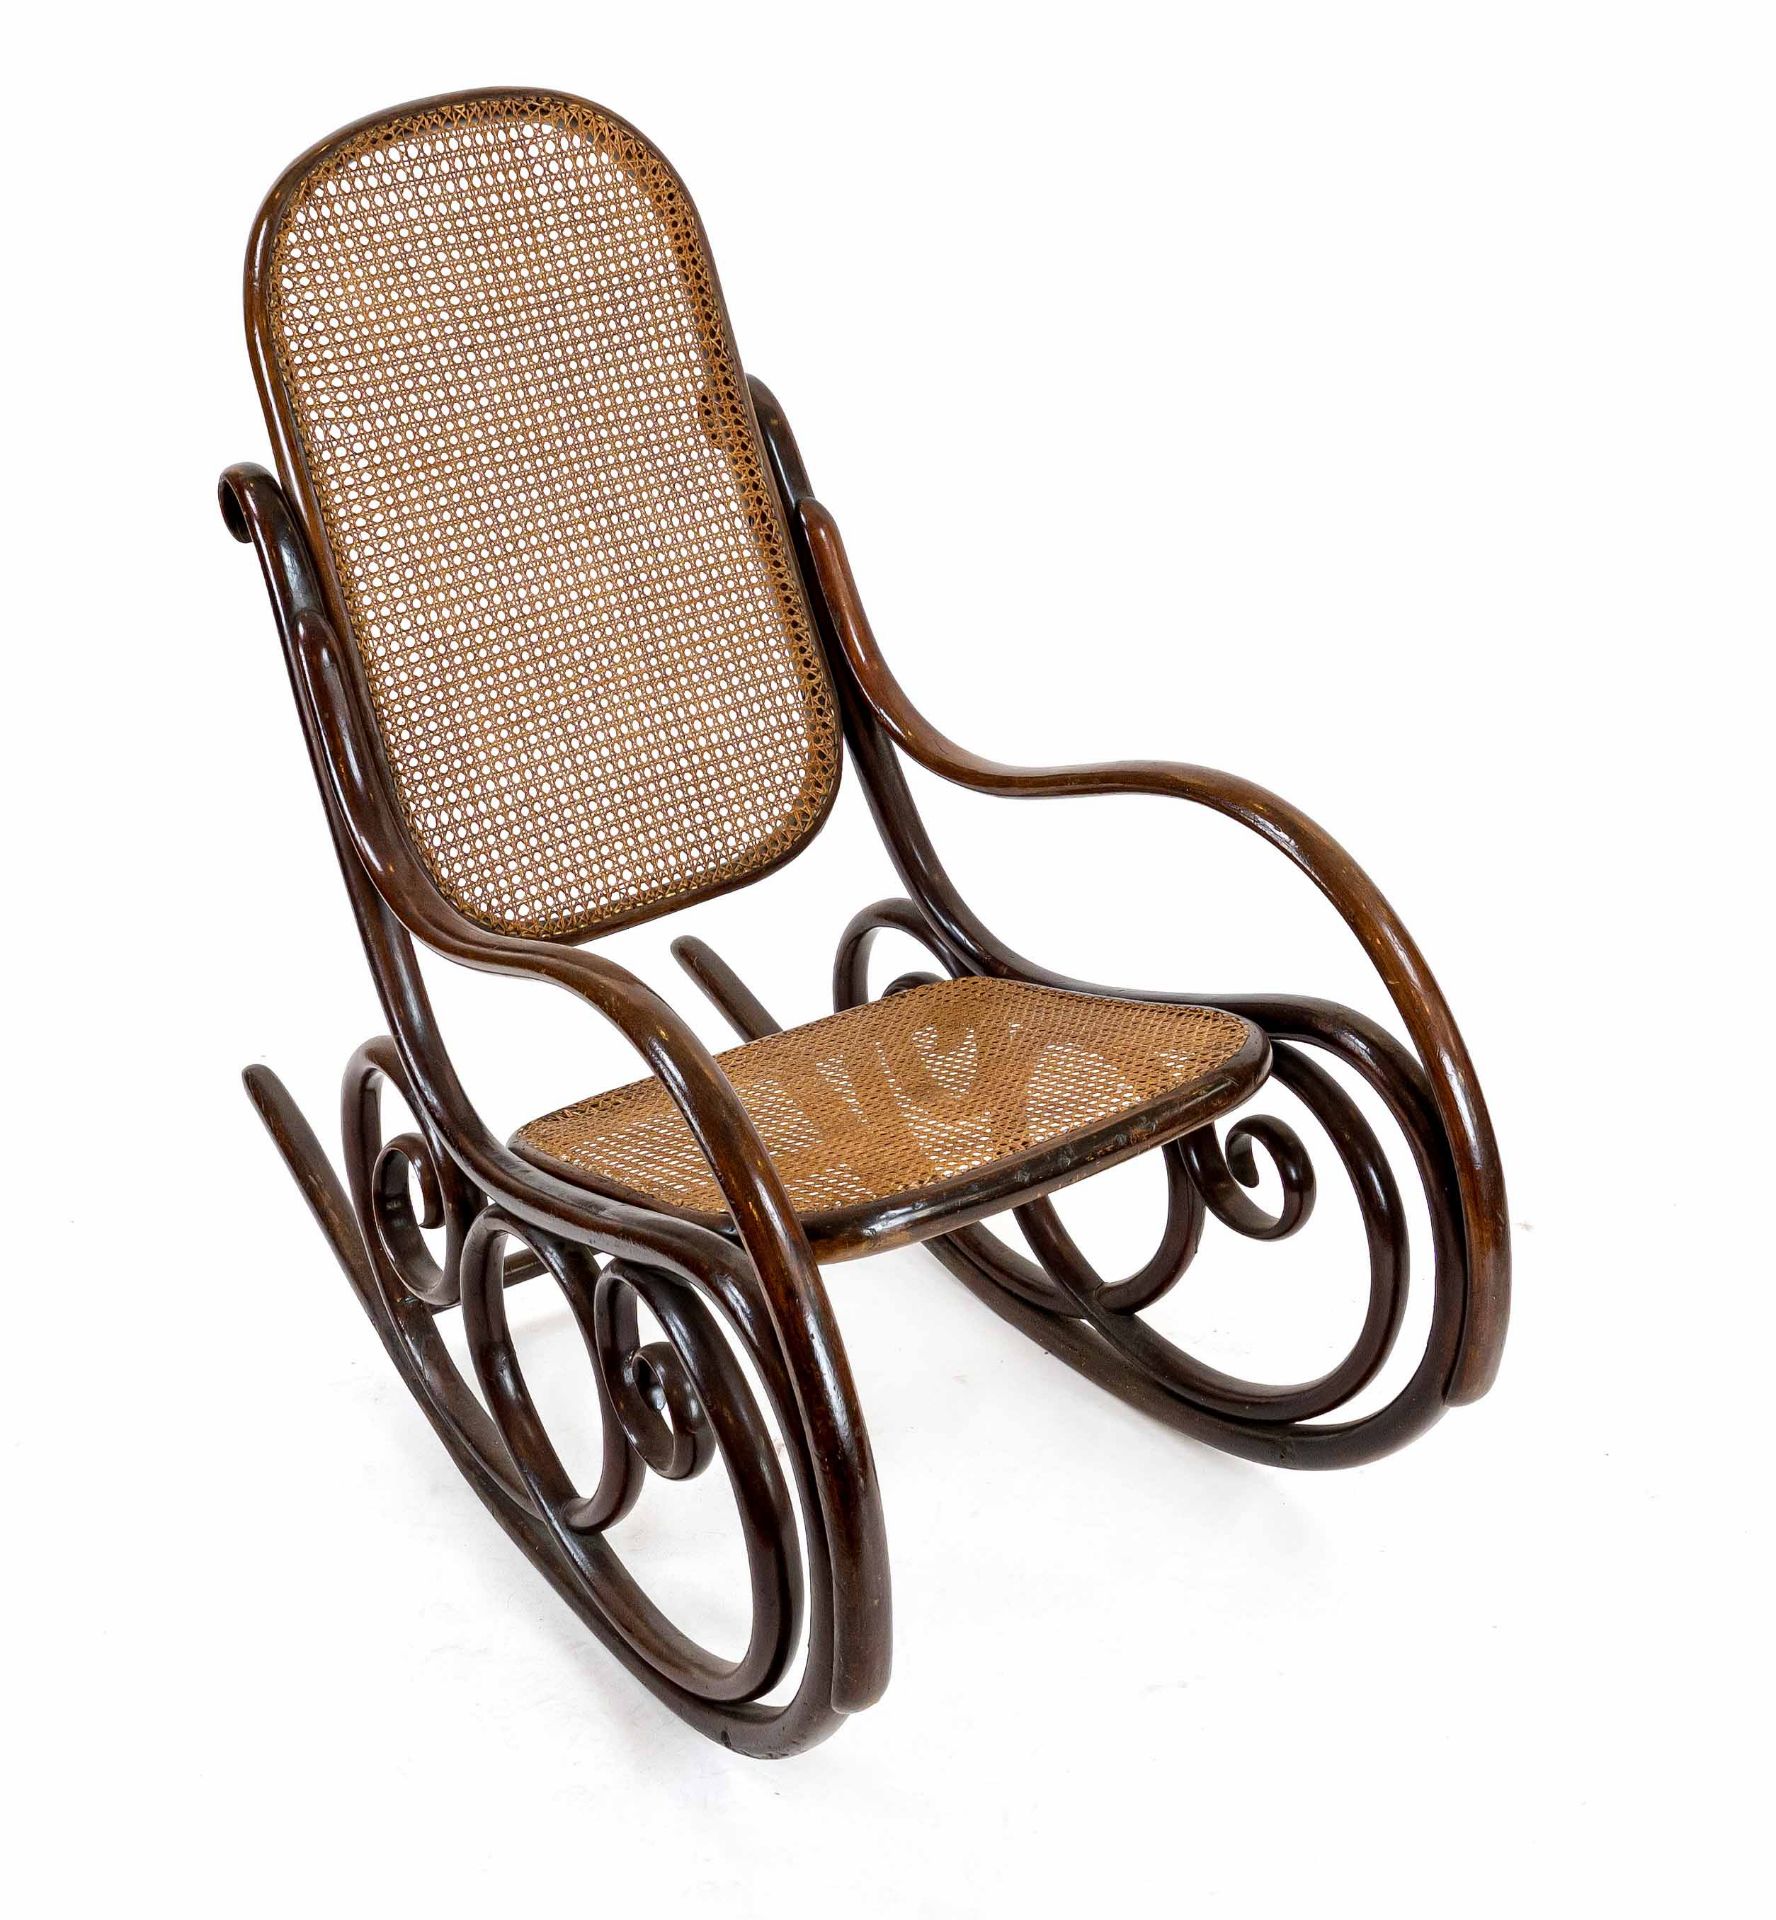 Rocking chair from around 1900, bent beech wood in the Thonet style, 100 x 56 x 110 cm - The